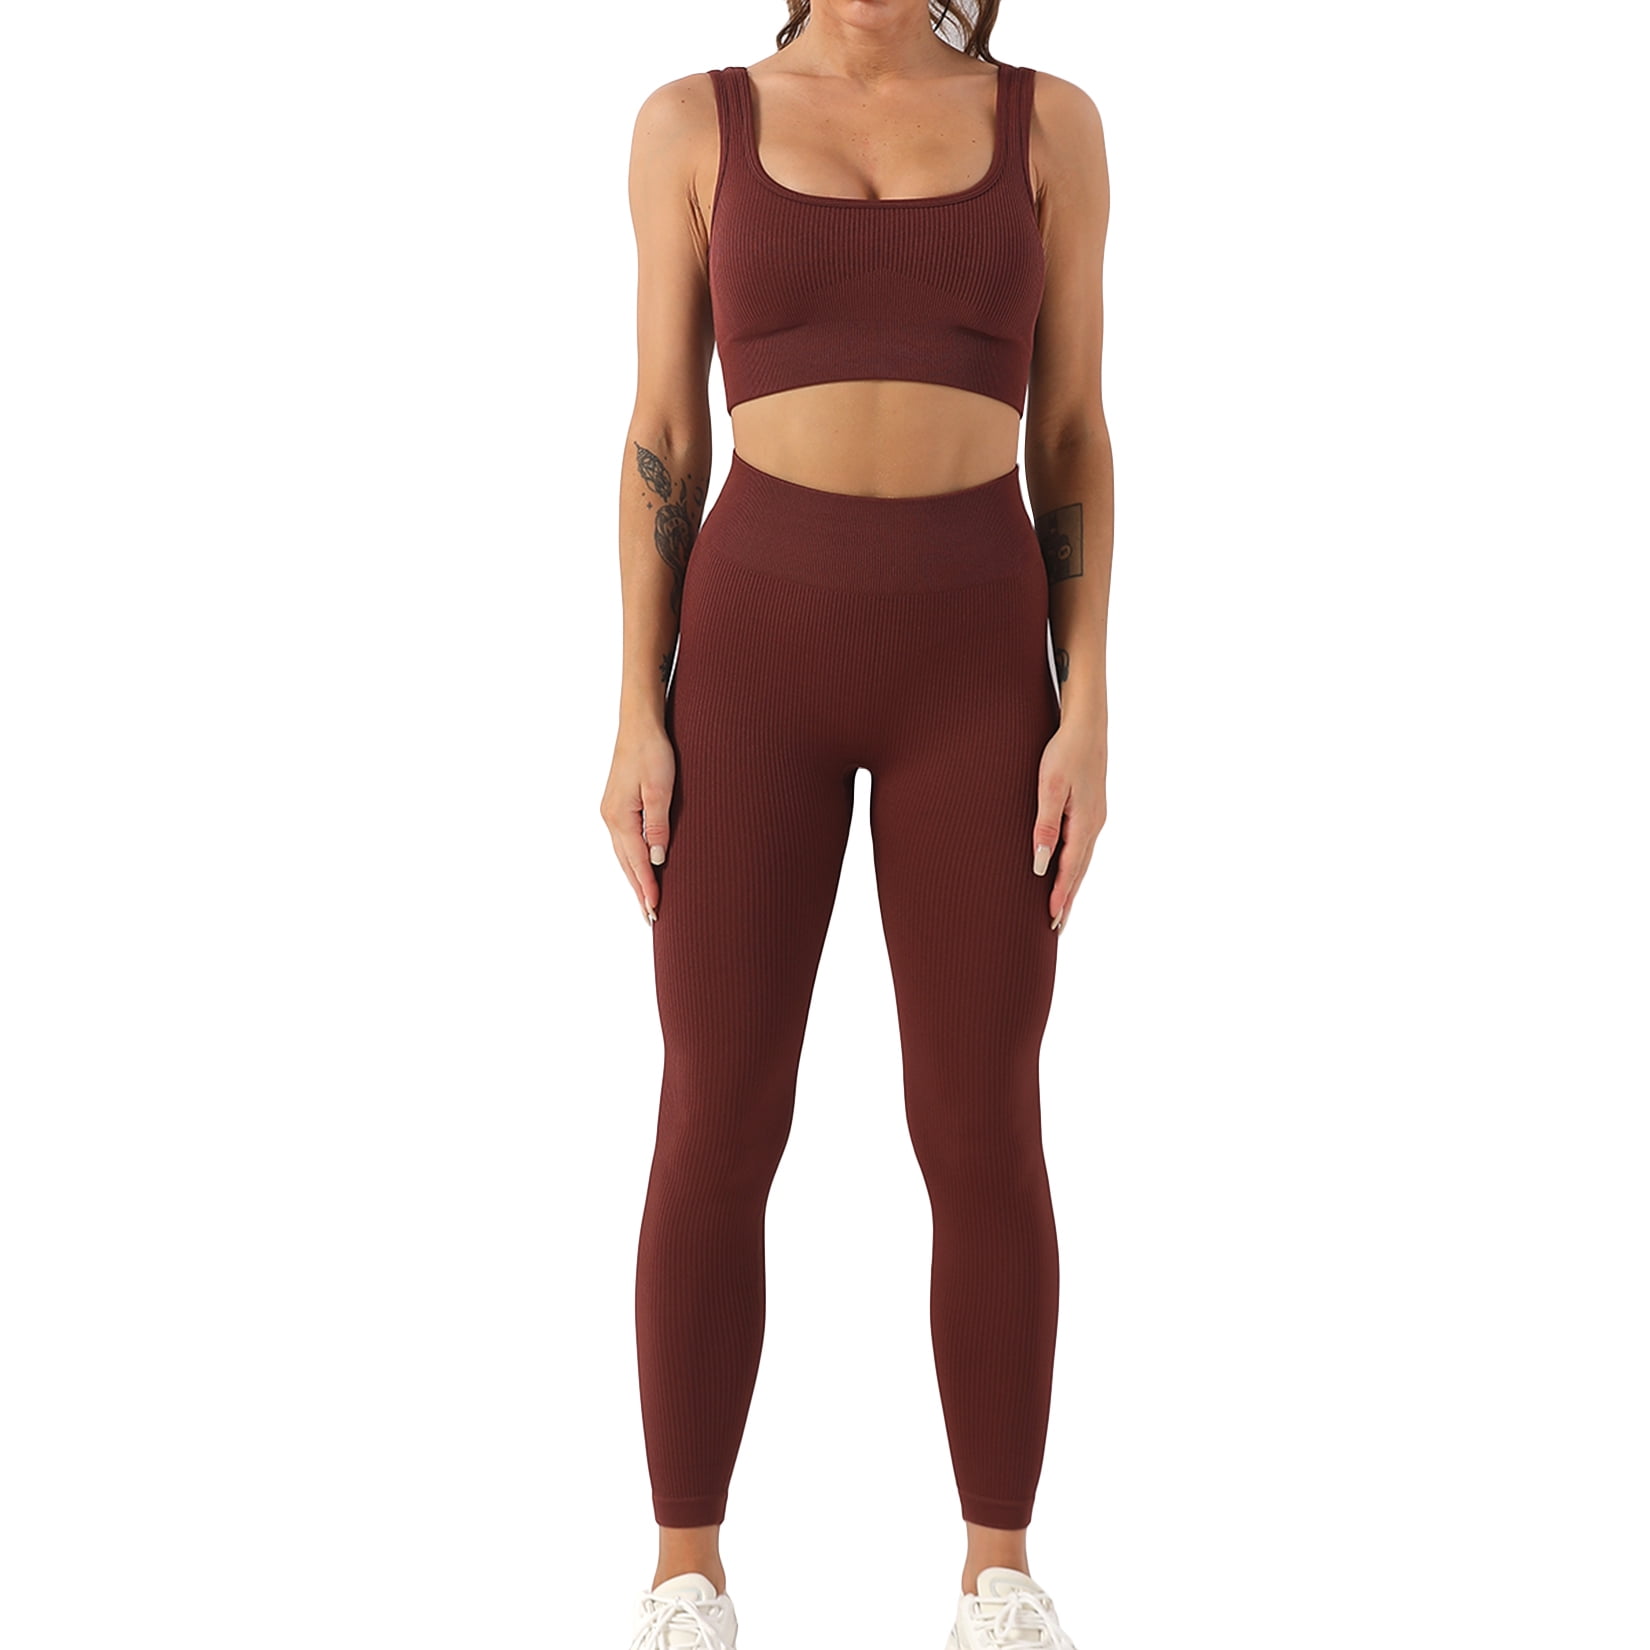 Lu's Chic Women's 2 Piece Outfits Crop Top and Leggings Workout Set High  Waisted Tracksuit Tummy Control Short Sleeve Pant Athletic Activewear 2Pcs  Purple Medium 